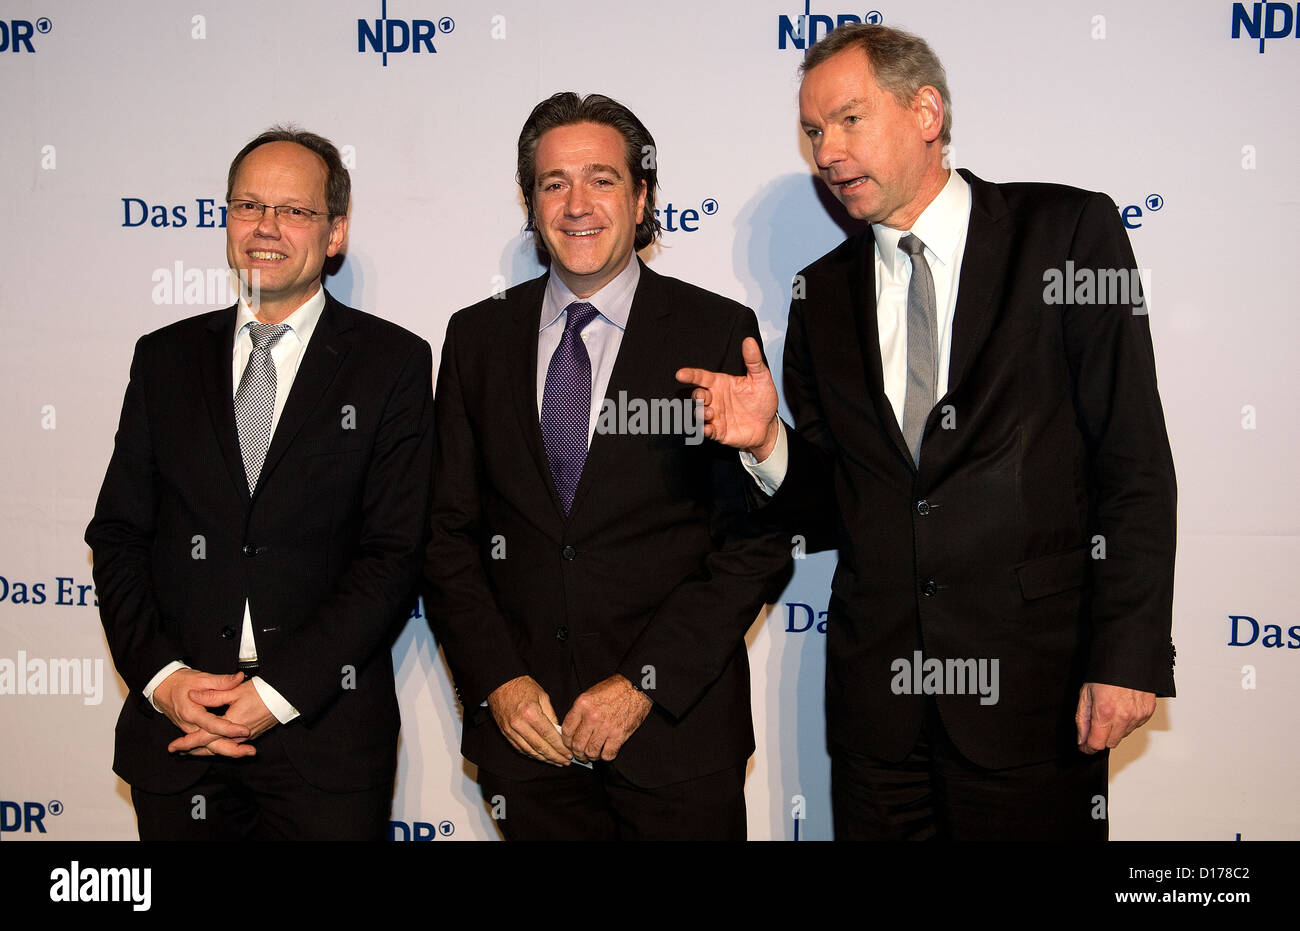 Kai Gniffke (L-R), 'Tagesschau' chief editor, German Press Agency (dpa) chief editor Wolfgang Buechner and NDR director Lutz Marmor pose at the news show's 60th anniversary party at Cruise Center in Hamburg, Germany, 06 December 2012. Photo: Axel Heimken Stock Photo